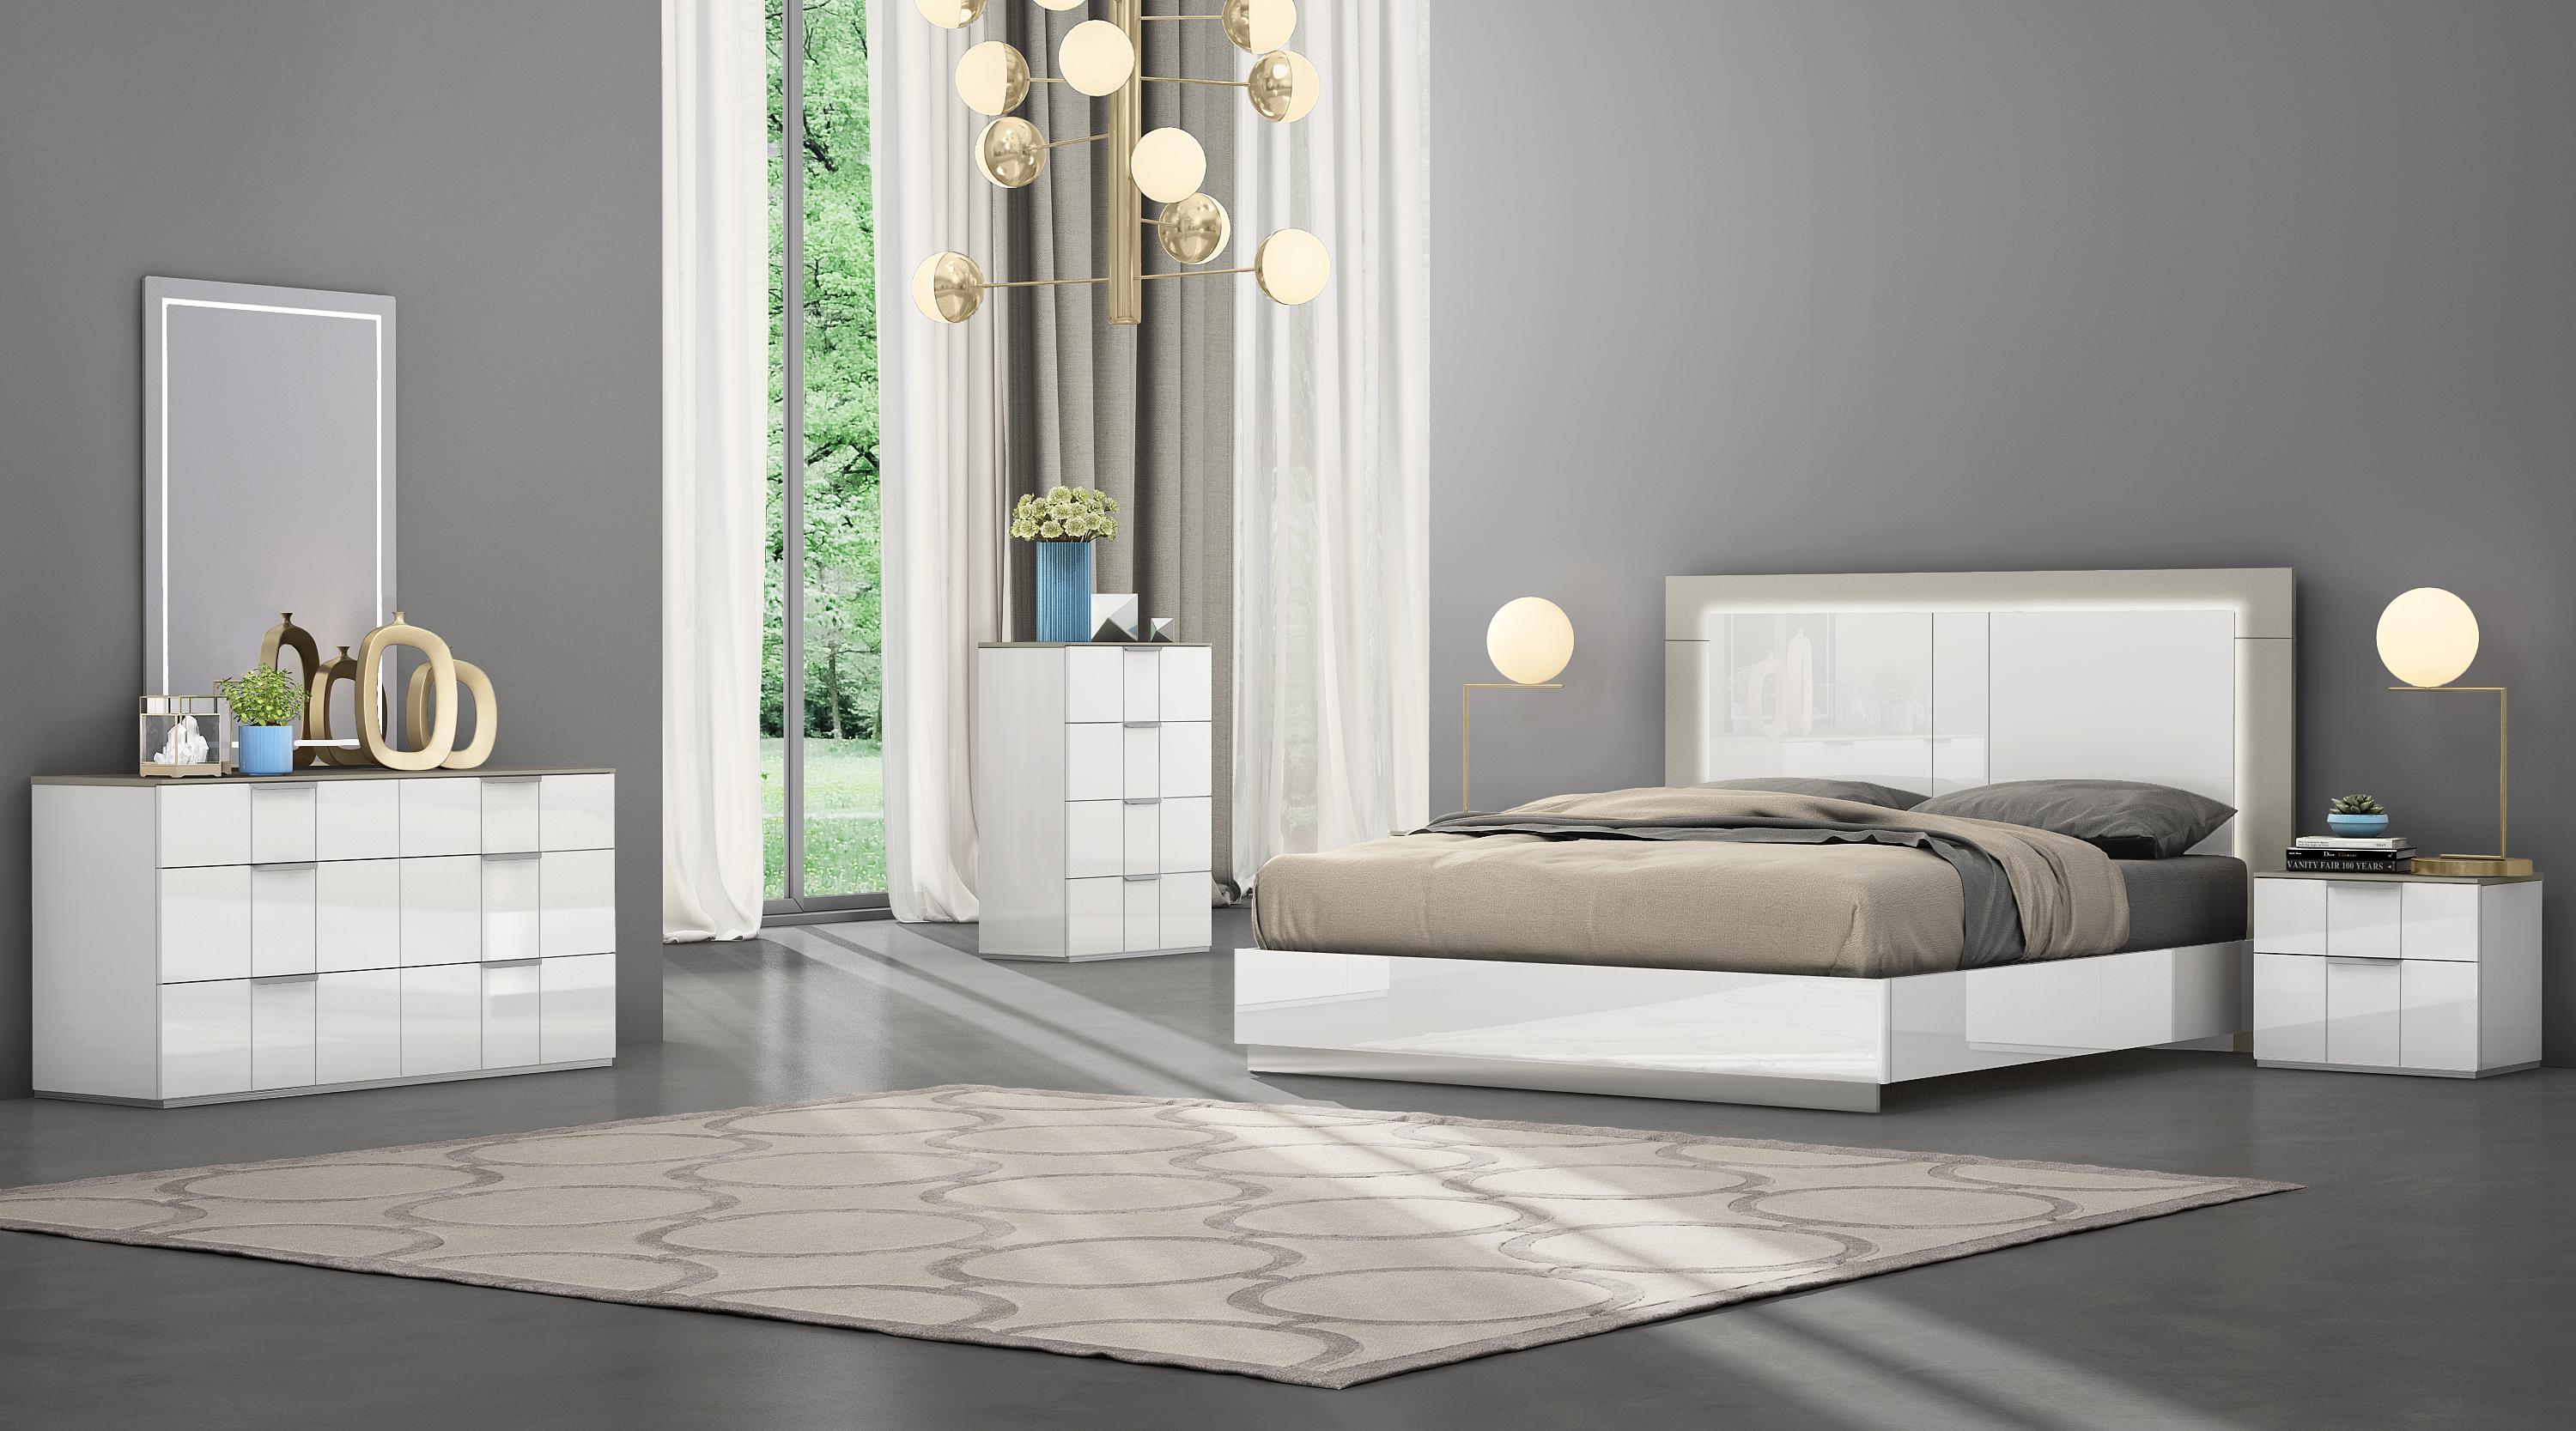 

    
Contemporary High Gloss White Solid Wood Queen Bedroom Set 3pcs WhiteLine BQ1723-WHT Daisy
